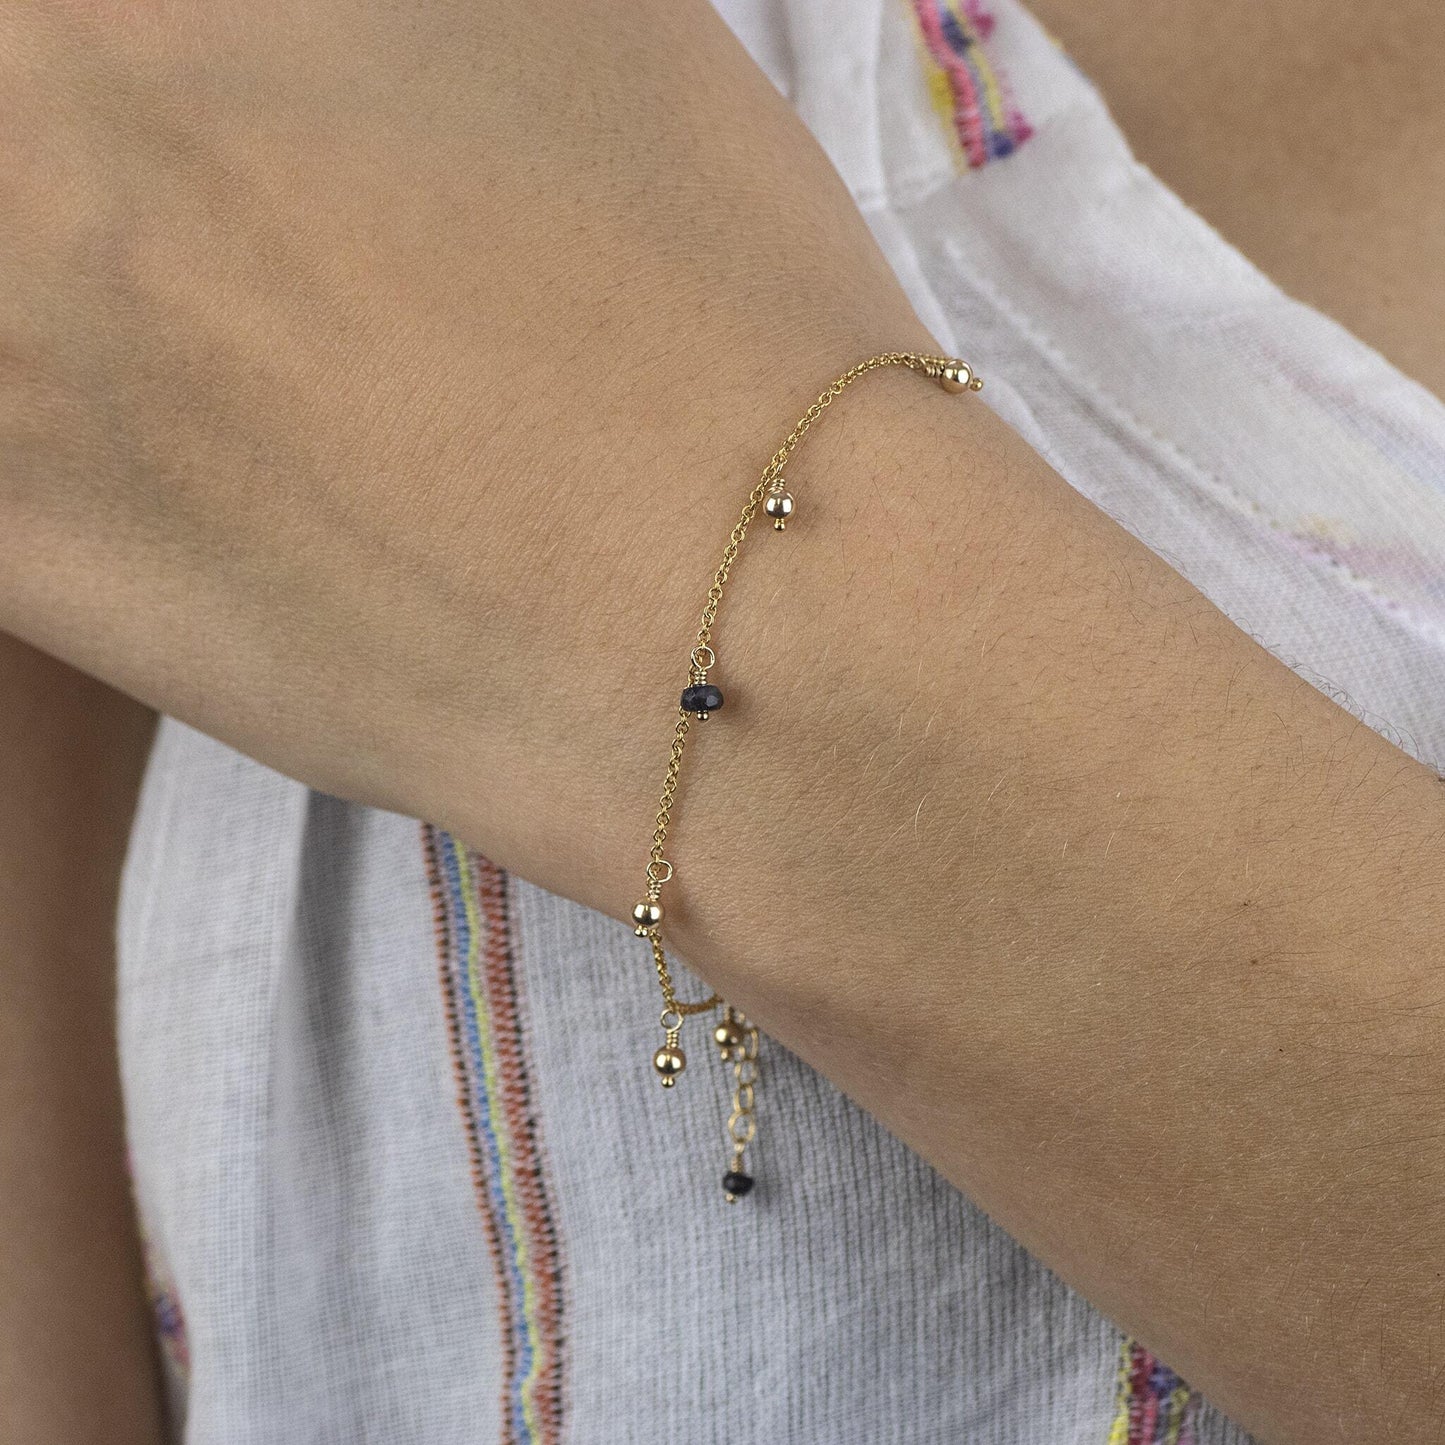 21st Birthday Gift - Delicate Double Birthstone Bracelet - Silver & Gold